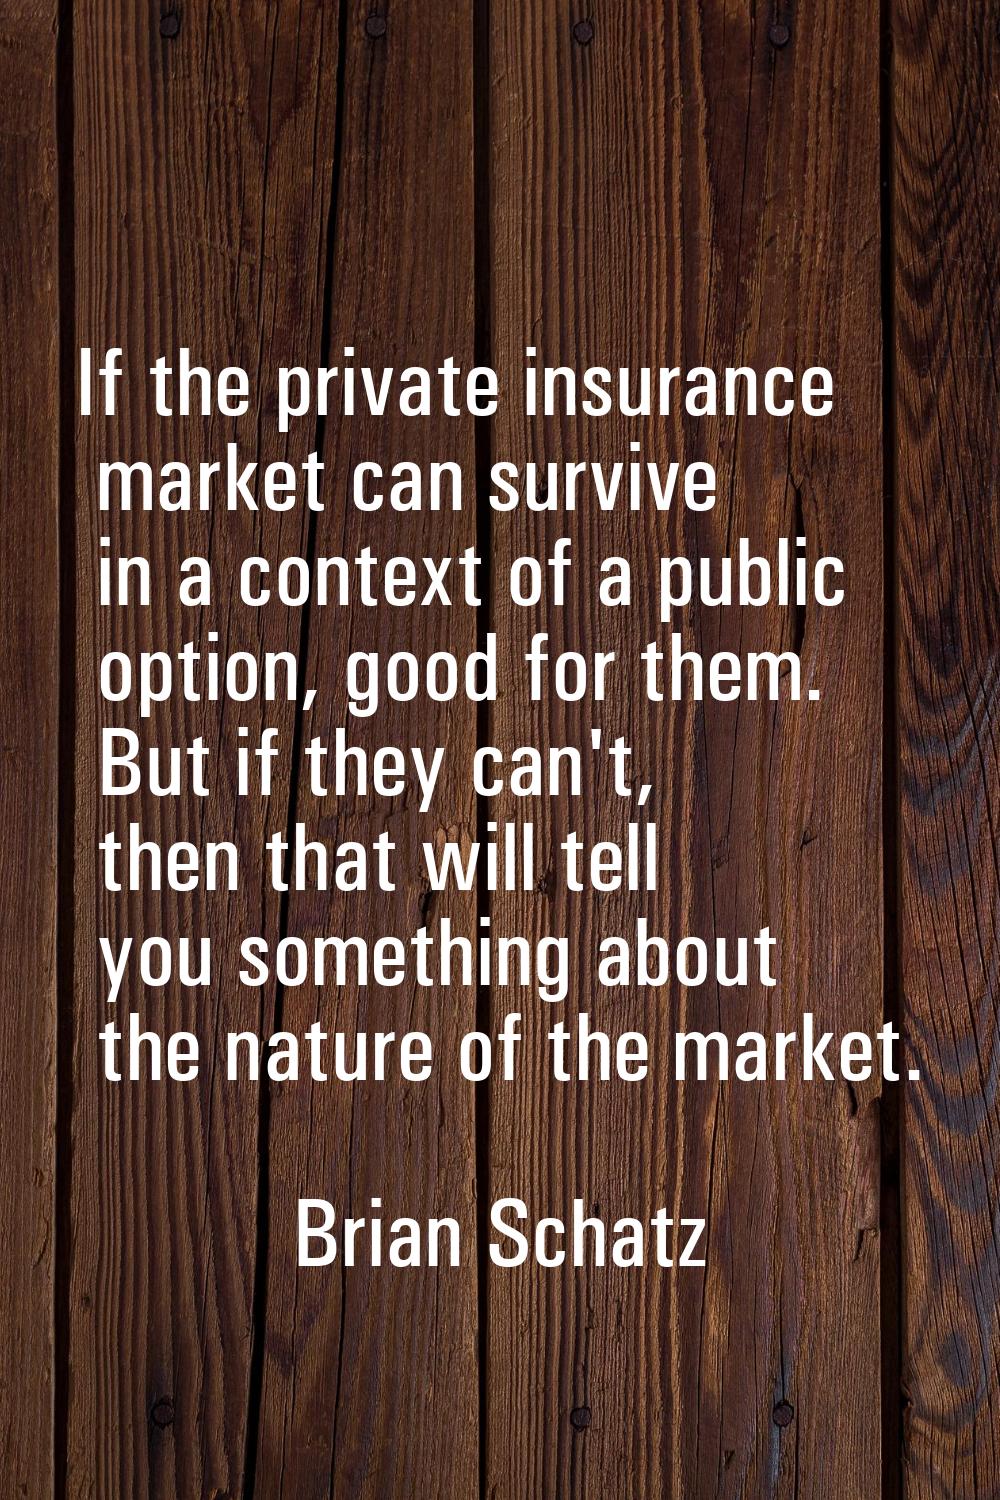 If the private insurance market can survive in a context of a public option, good for them. But if 